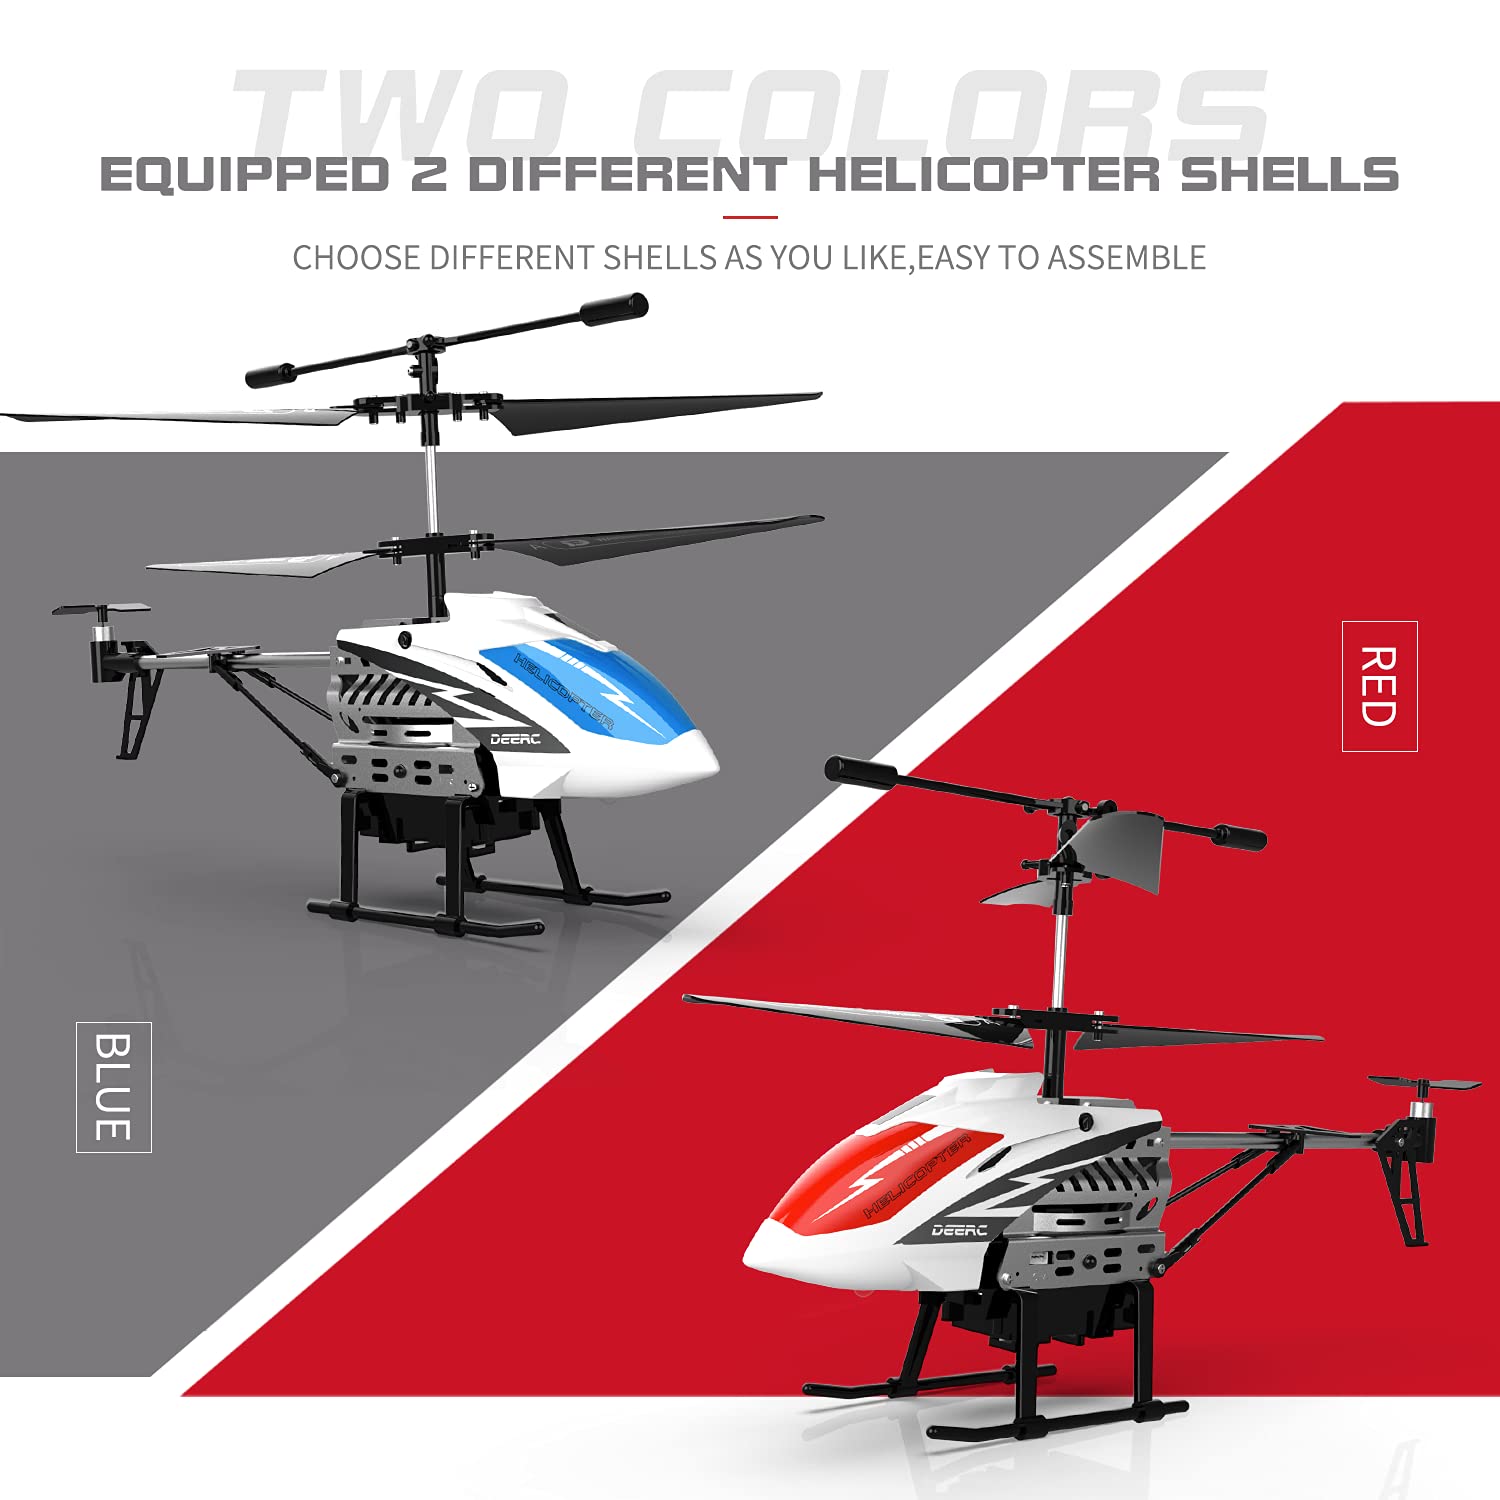 DEERC DE51 Remote Control Helicopter Altitude Hold RC Helicopters with Gyro for Adult Kid Beginner,2.4GHz Aircraft Indoor Flying Toy with 3.5 Channel,High&Low Speed,LED Light,2 Battery for 20 Min Play